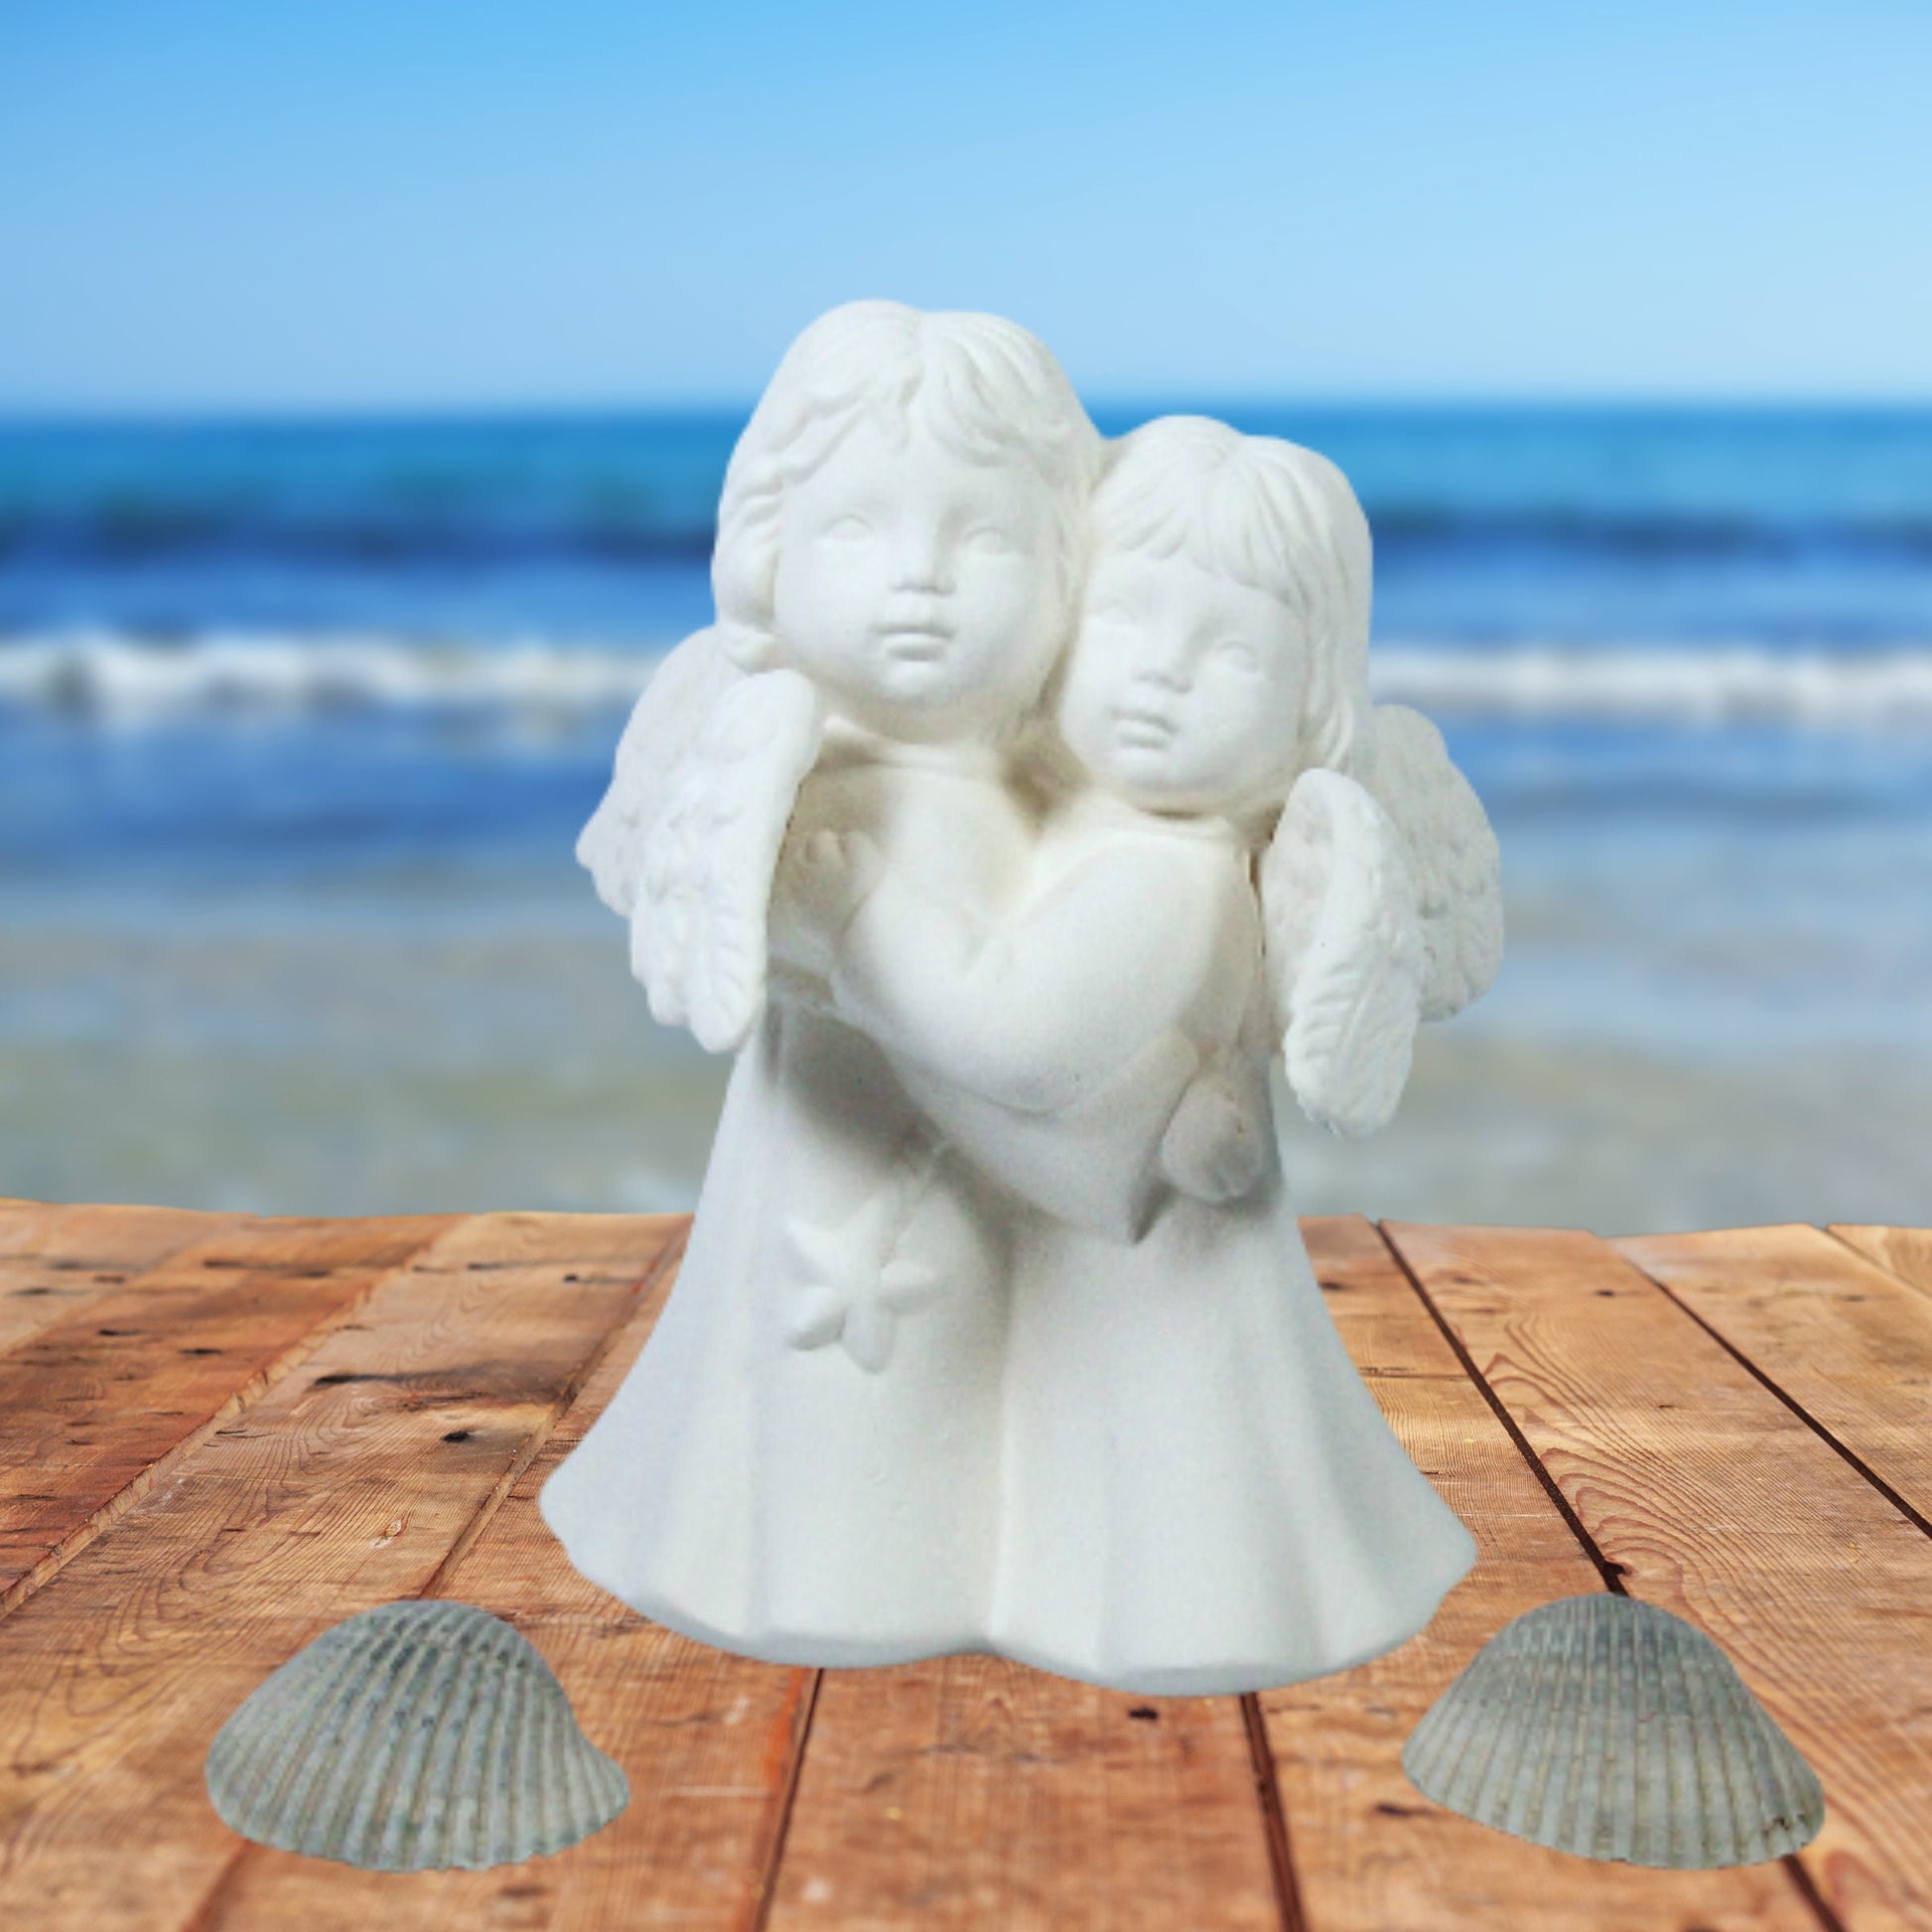 Ready to Paint Ceramic Hugging angels figurine on a table by the ocean with sea shells near